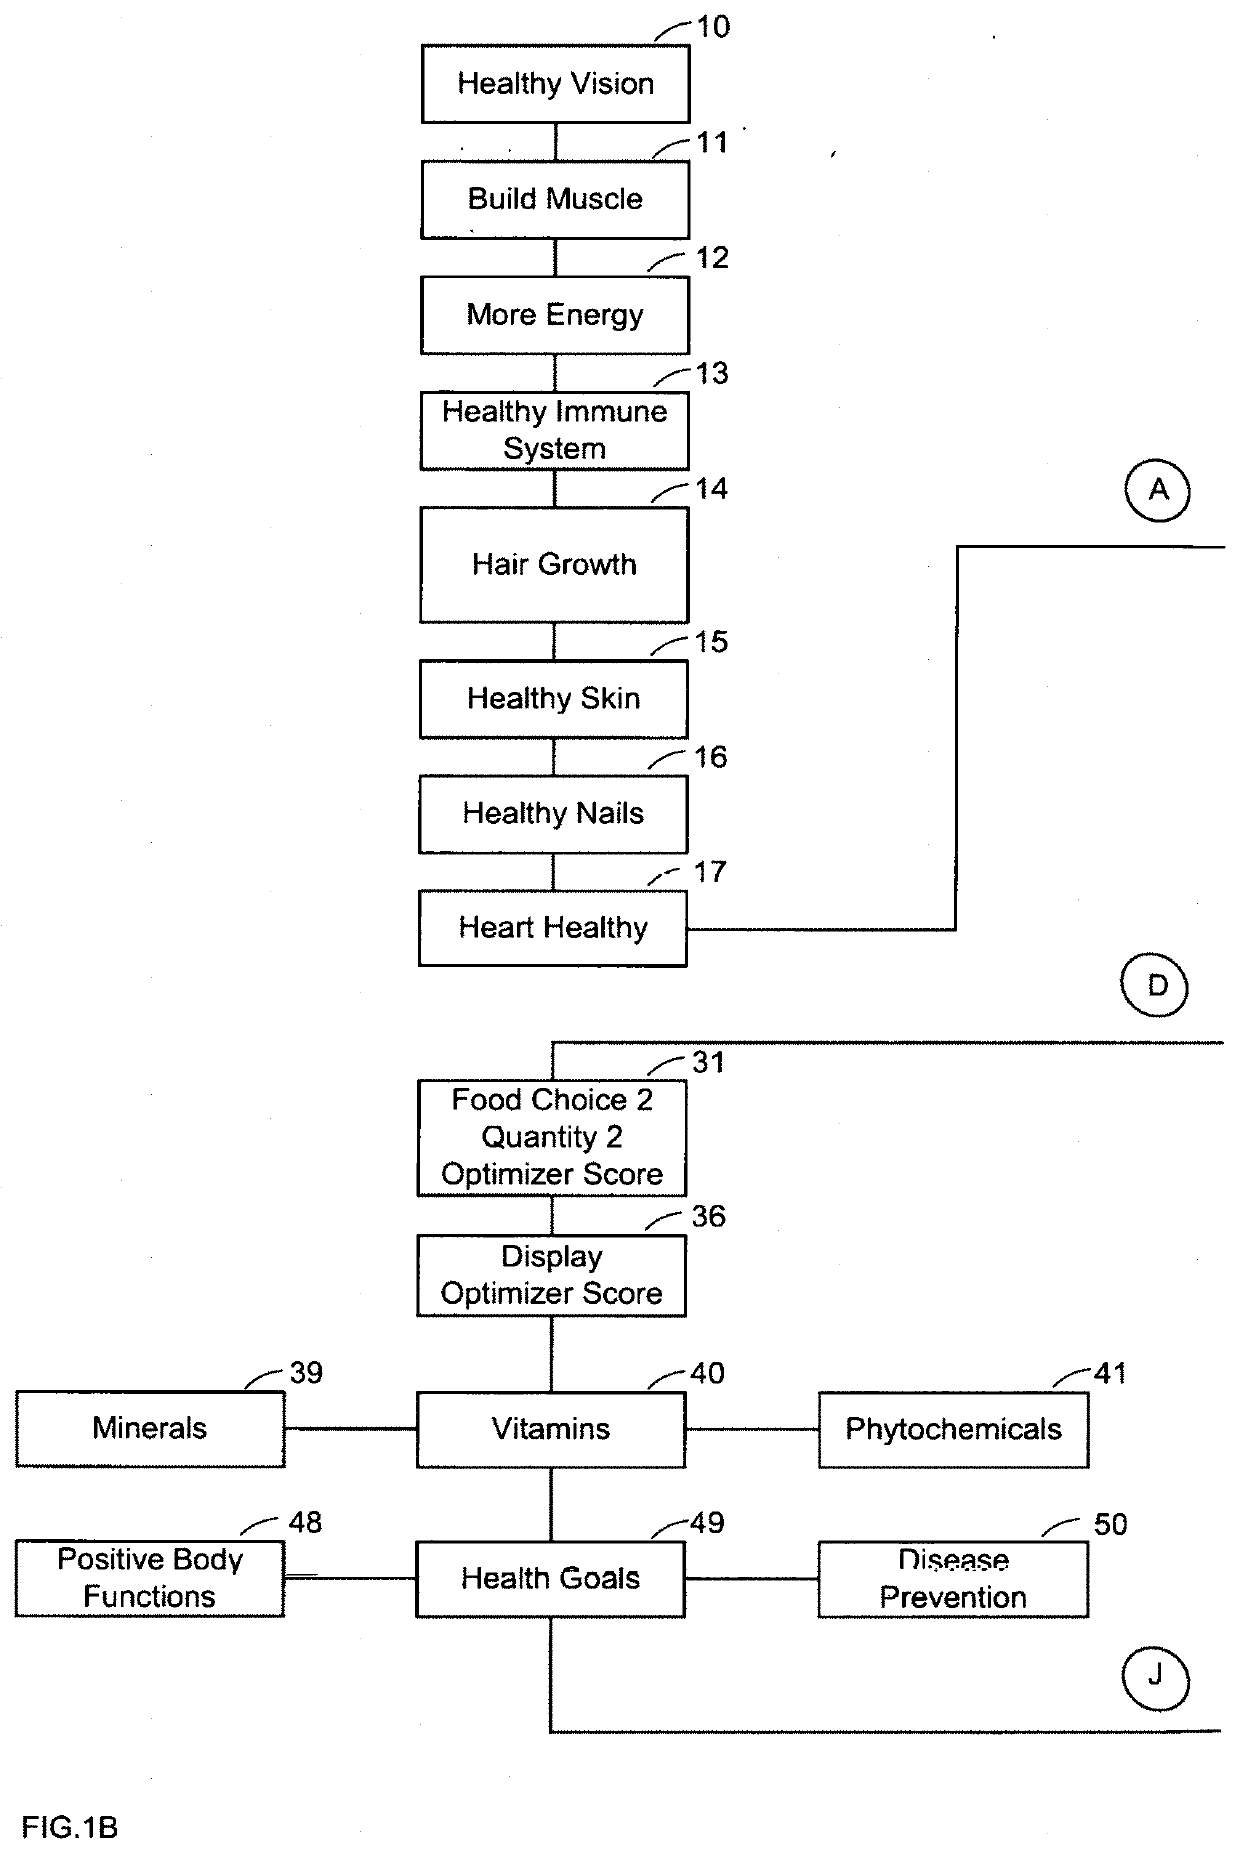 System and method for the interactive provision of meal plans to optimize human health goals through nutrient consumption to enhance body functions, health goals and disease prevention